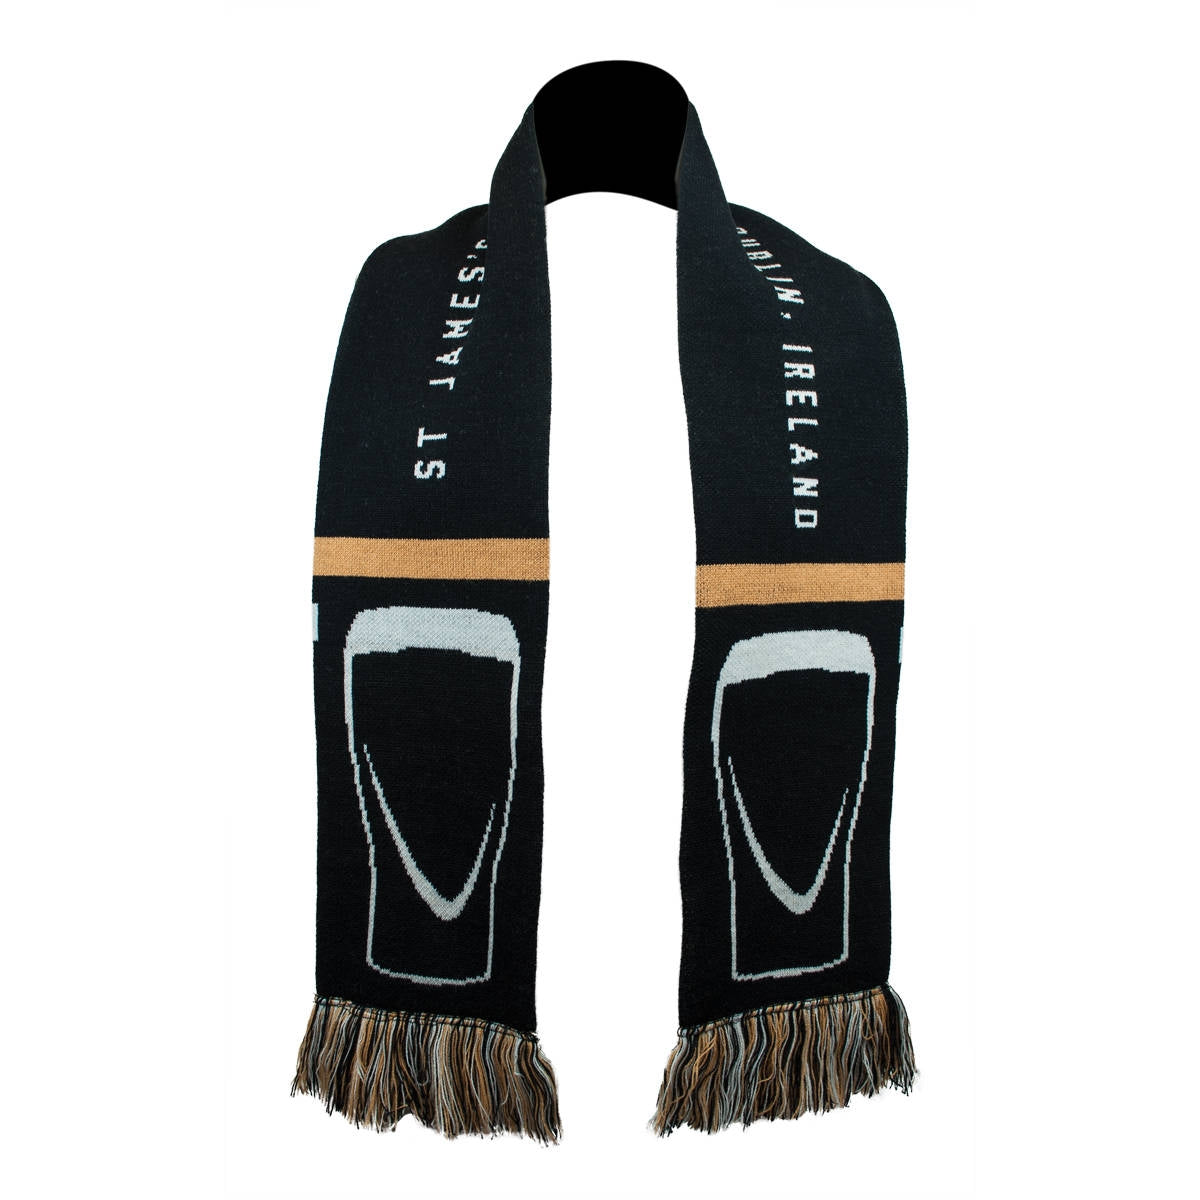 A Guinness Sports Scarf, the perfect autumn/winter accessory, with the words "St Ireland" on it.